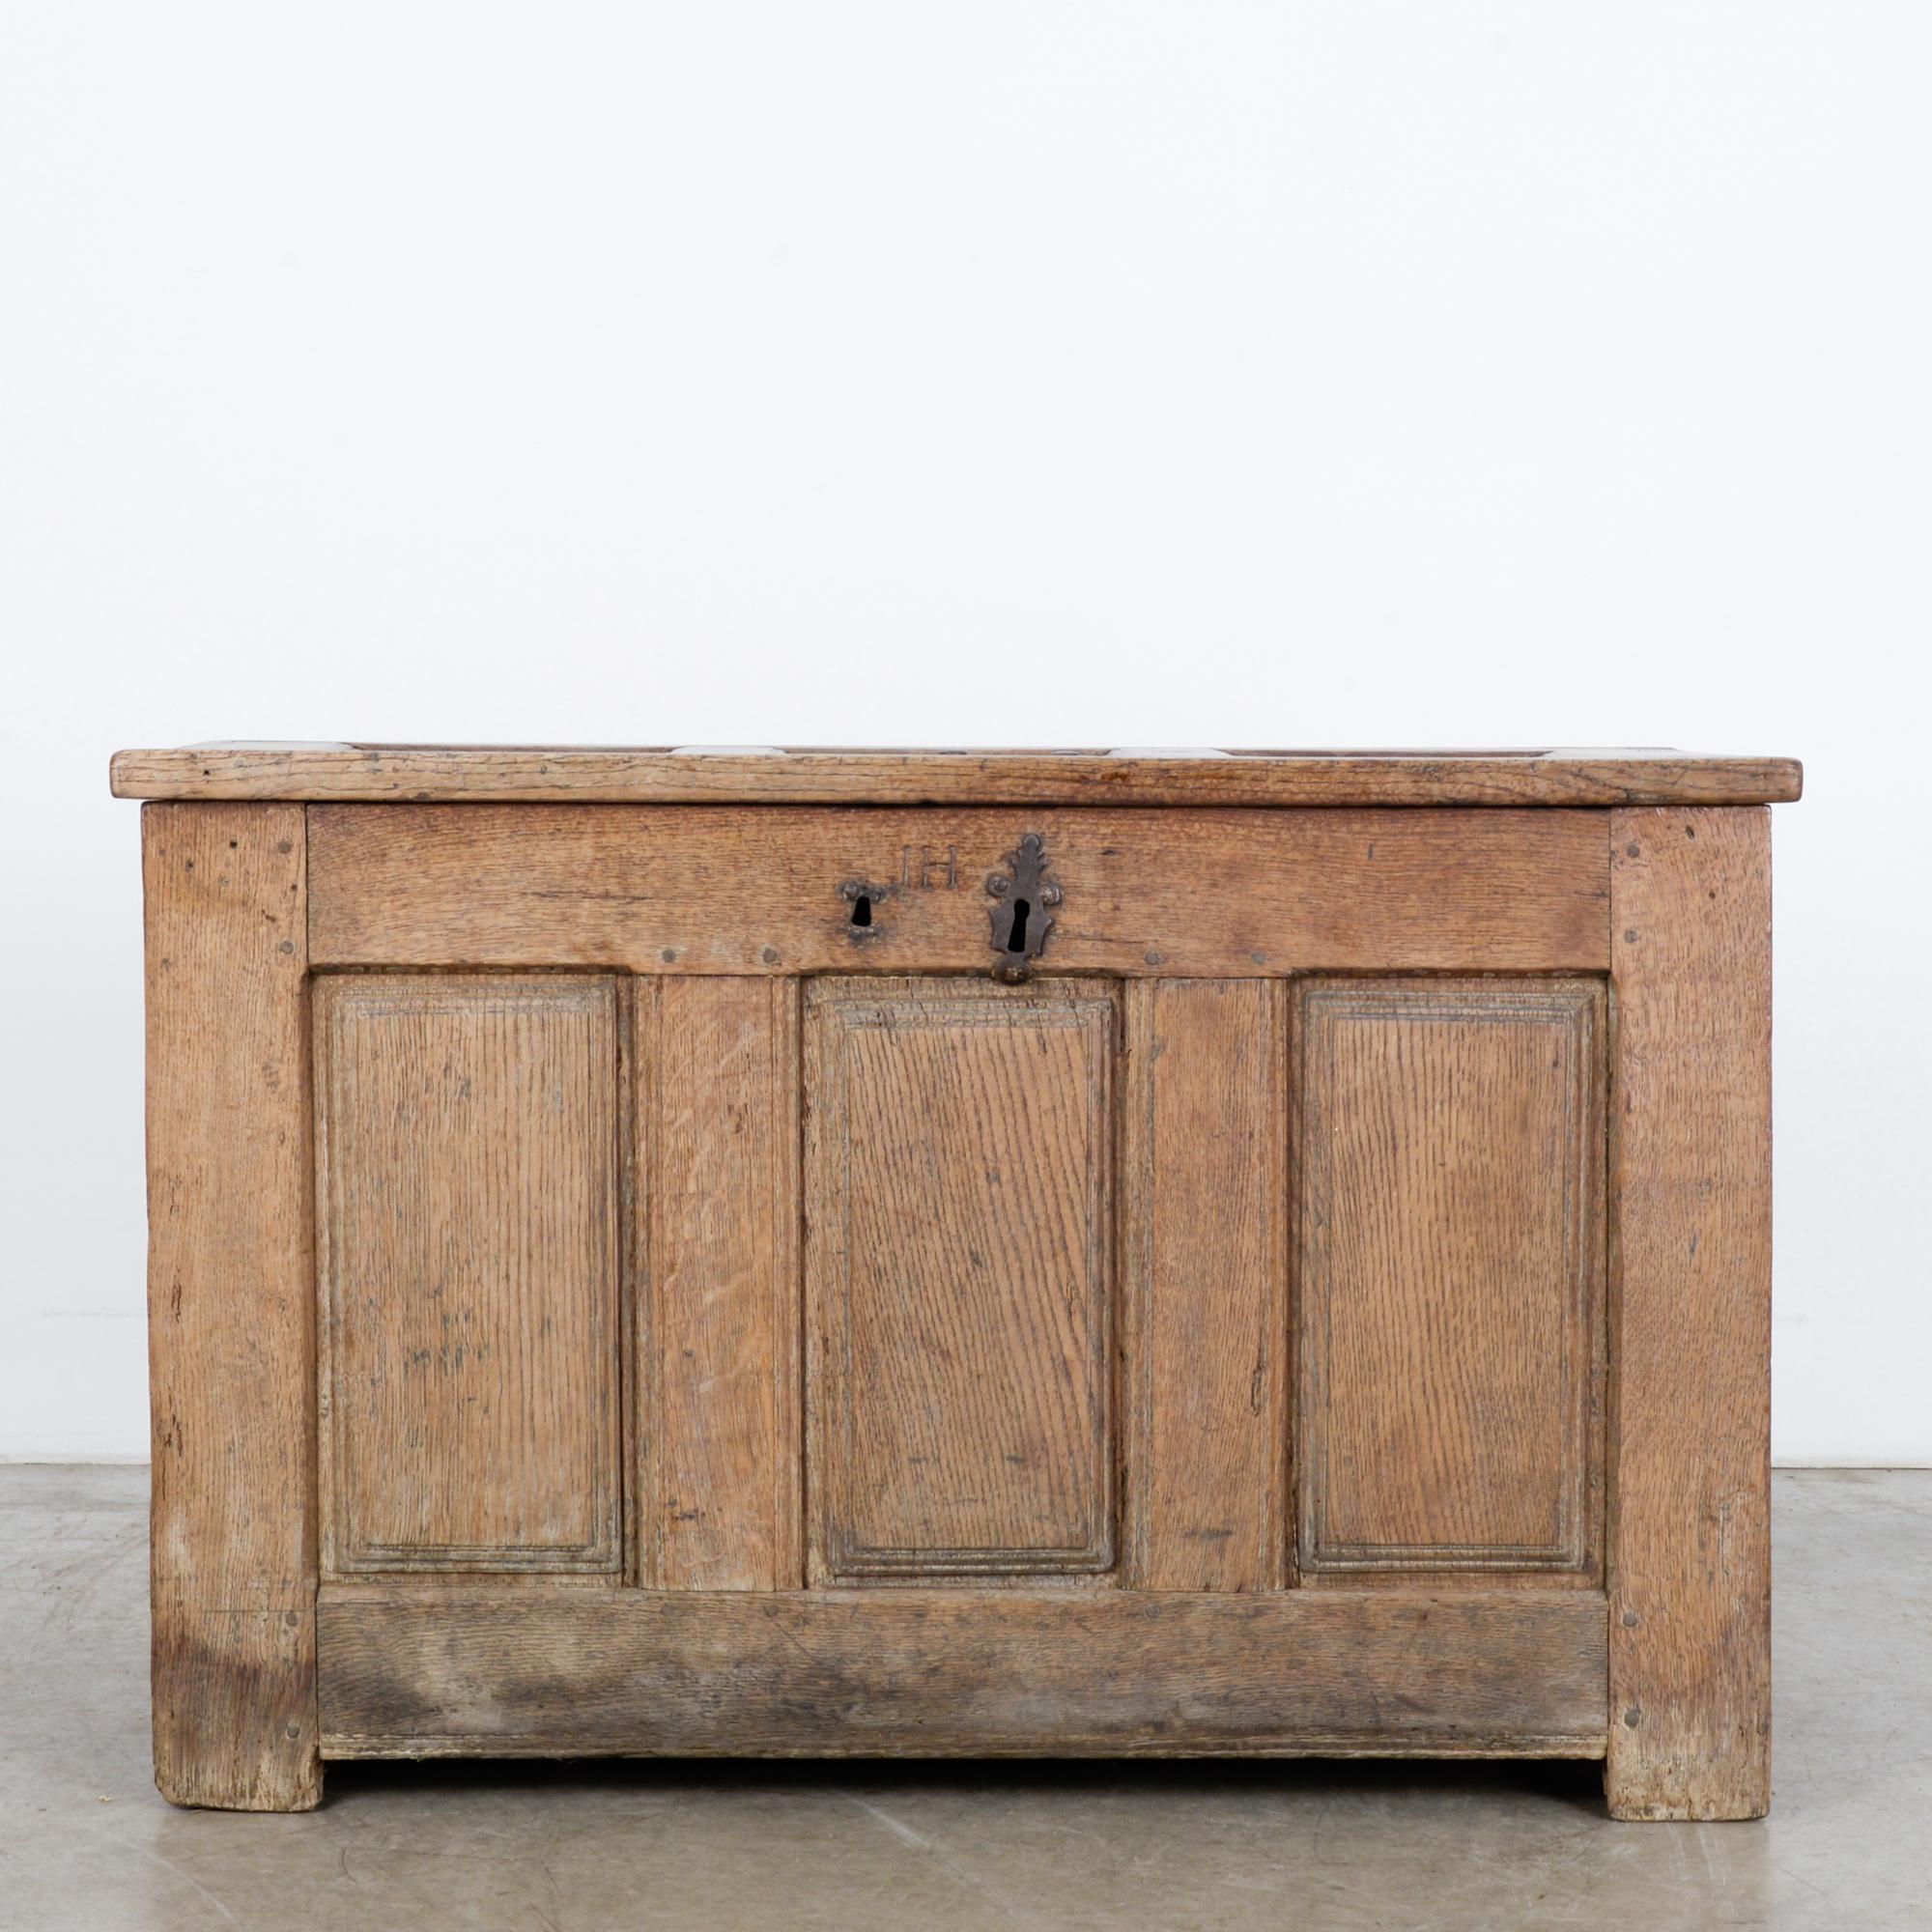 A wooden trunk from France, circa 1820. Classic rustic design with recessed rectangular panels around the sides and across the lid. Has original hinges with a new chain to hold the lid open. Features original lock with manufacturers mark stamped in